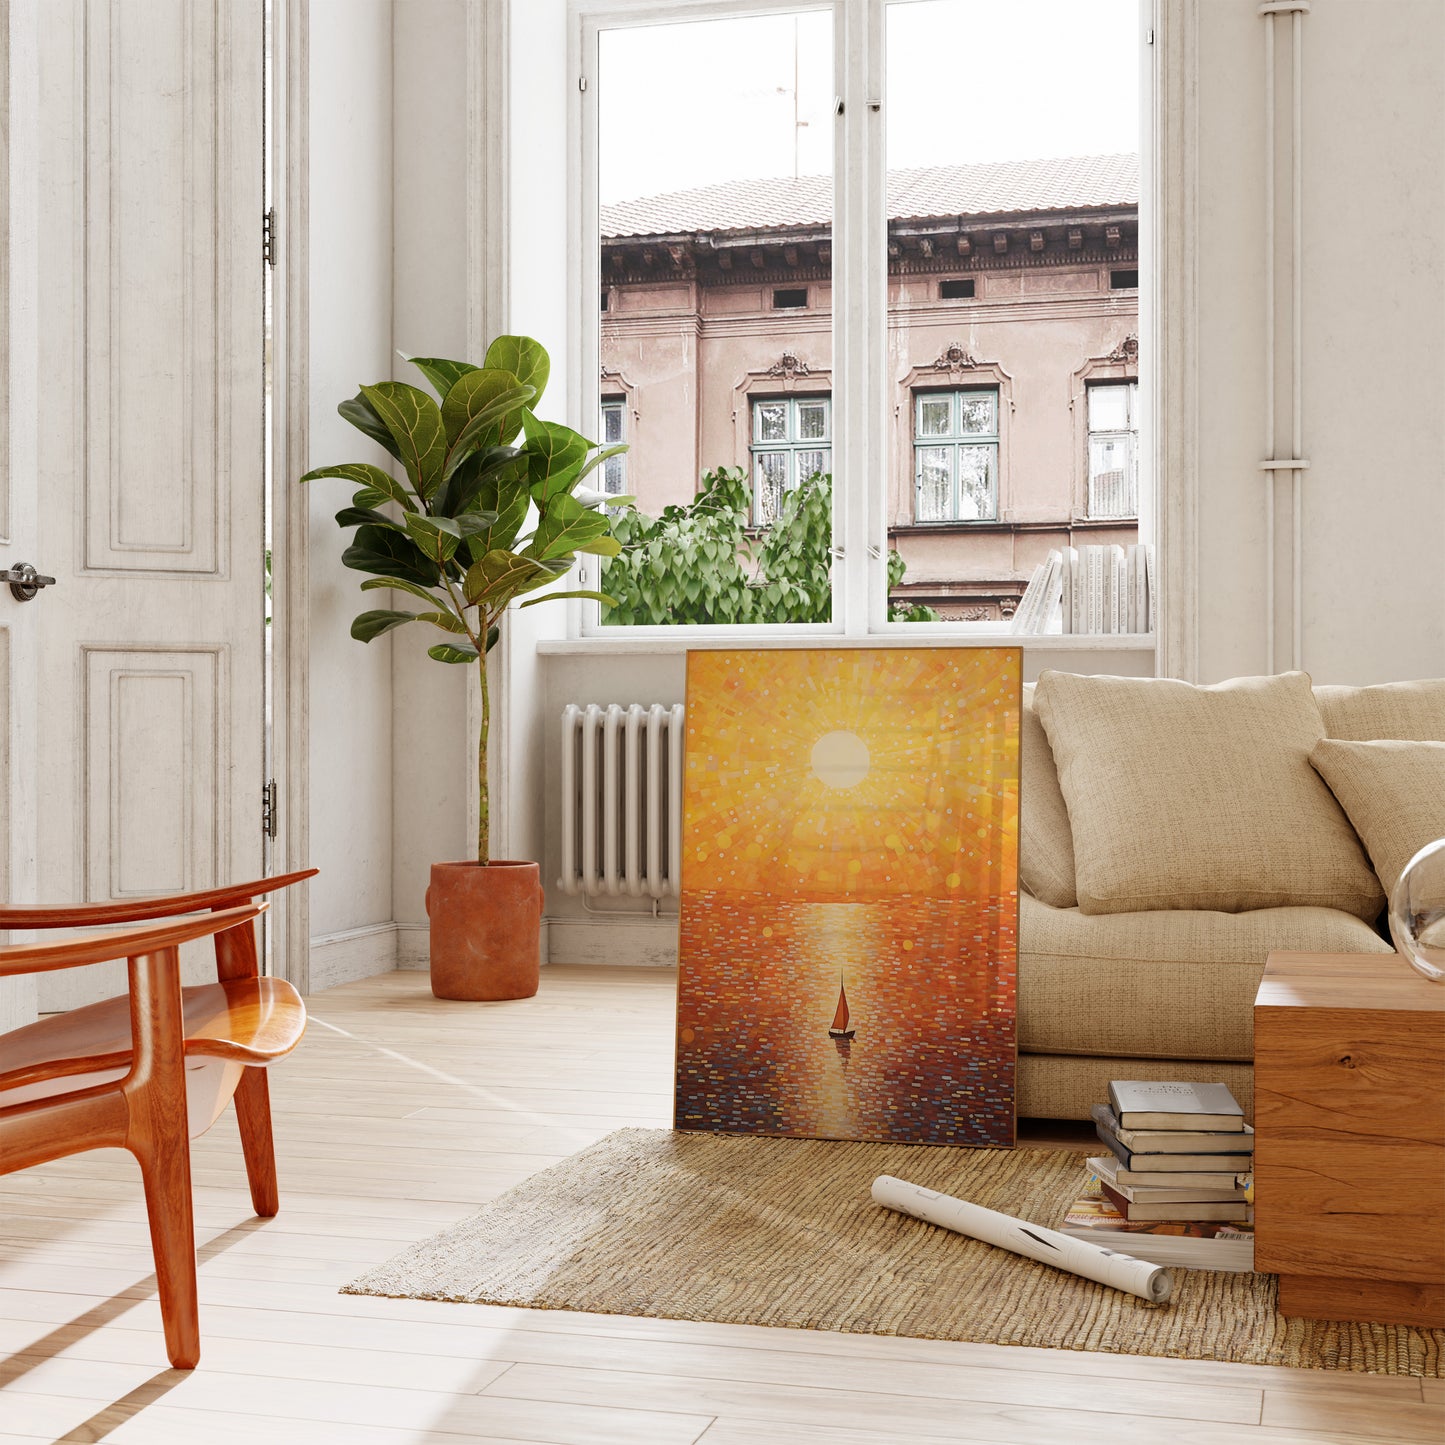 A serene painting leaning against a wall in a sunlit, cozy living room.